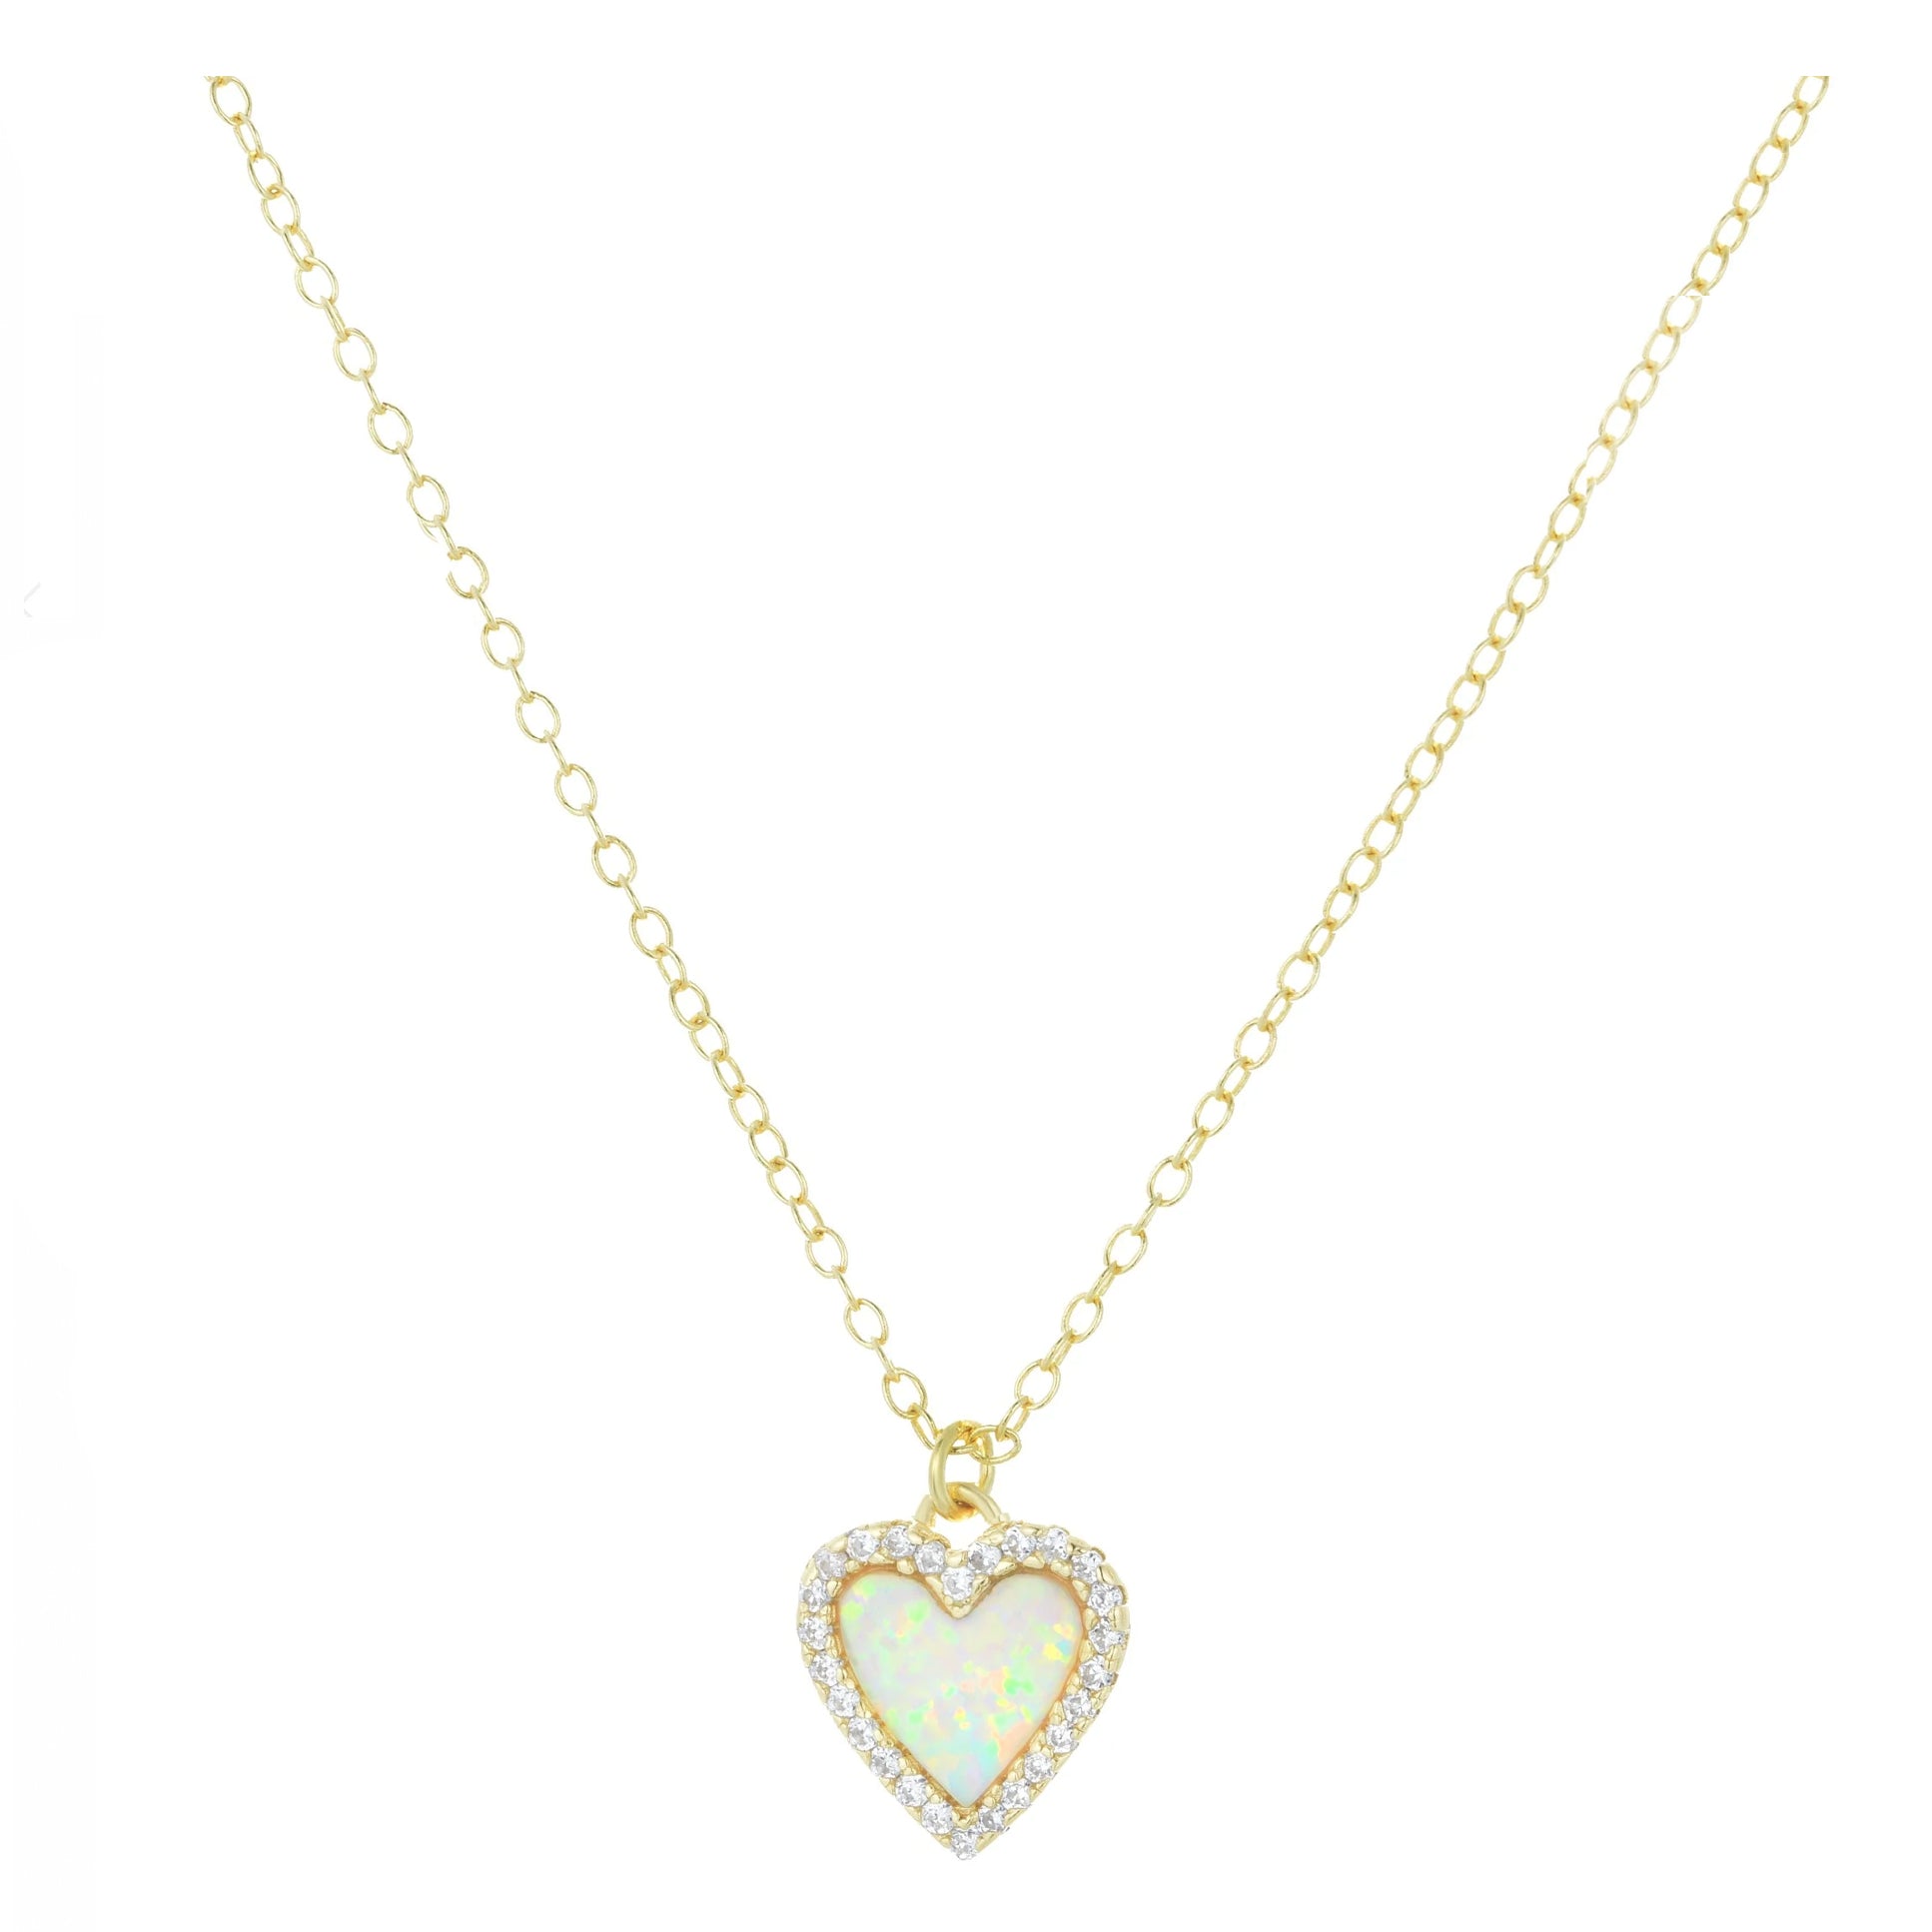 Opal Heart Necklace (Available in 3 Colors)